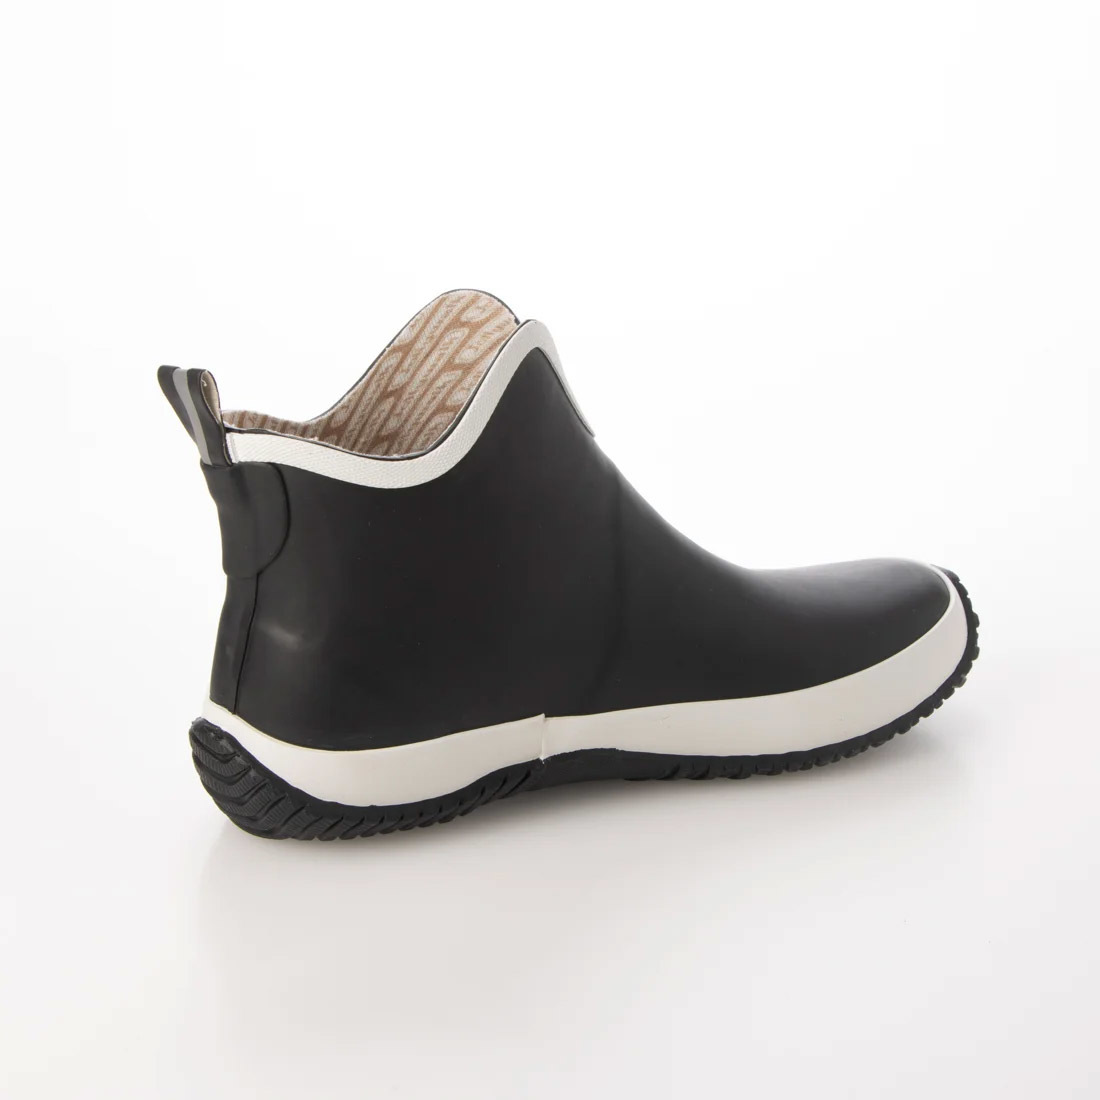  men's rain boots rain shoes boots rain shoes natural rubber material new goods [20089-blk-wht-270]27.0cm stock one . sale 